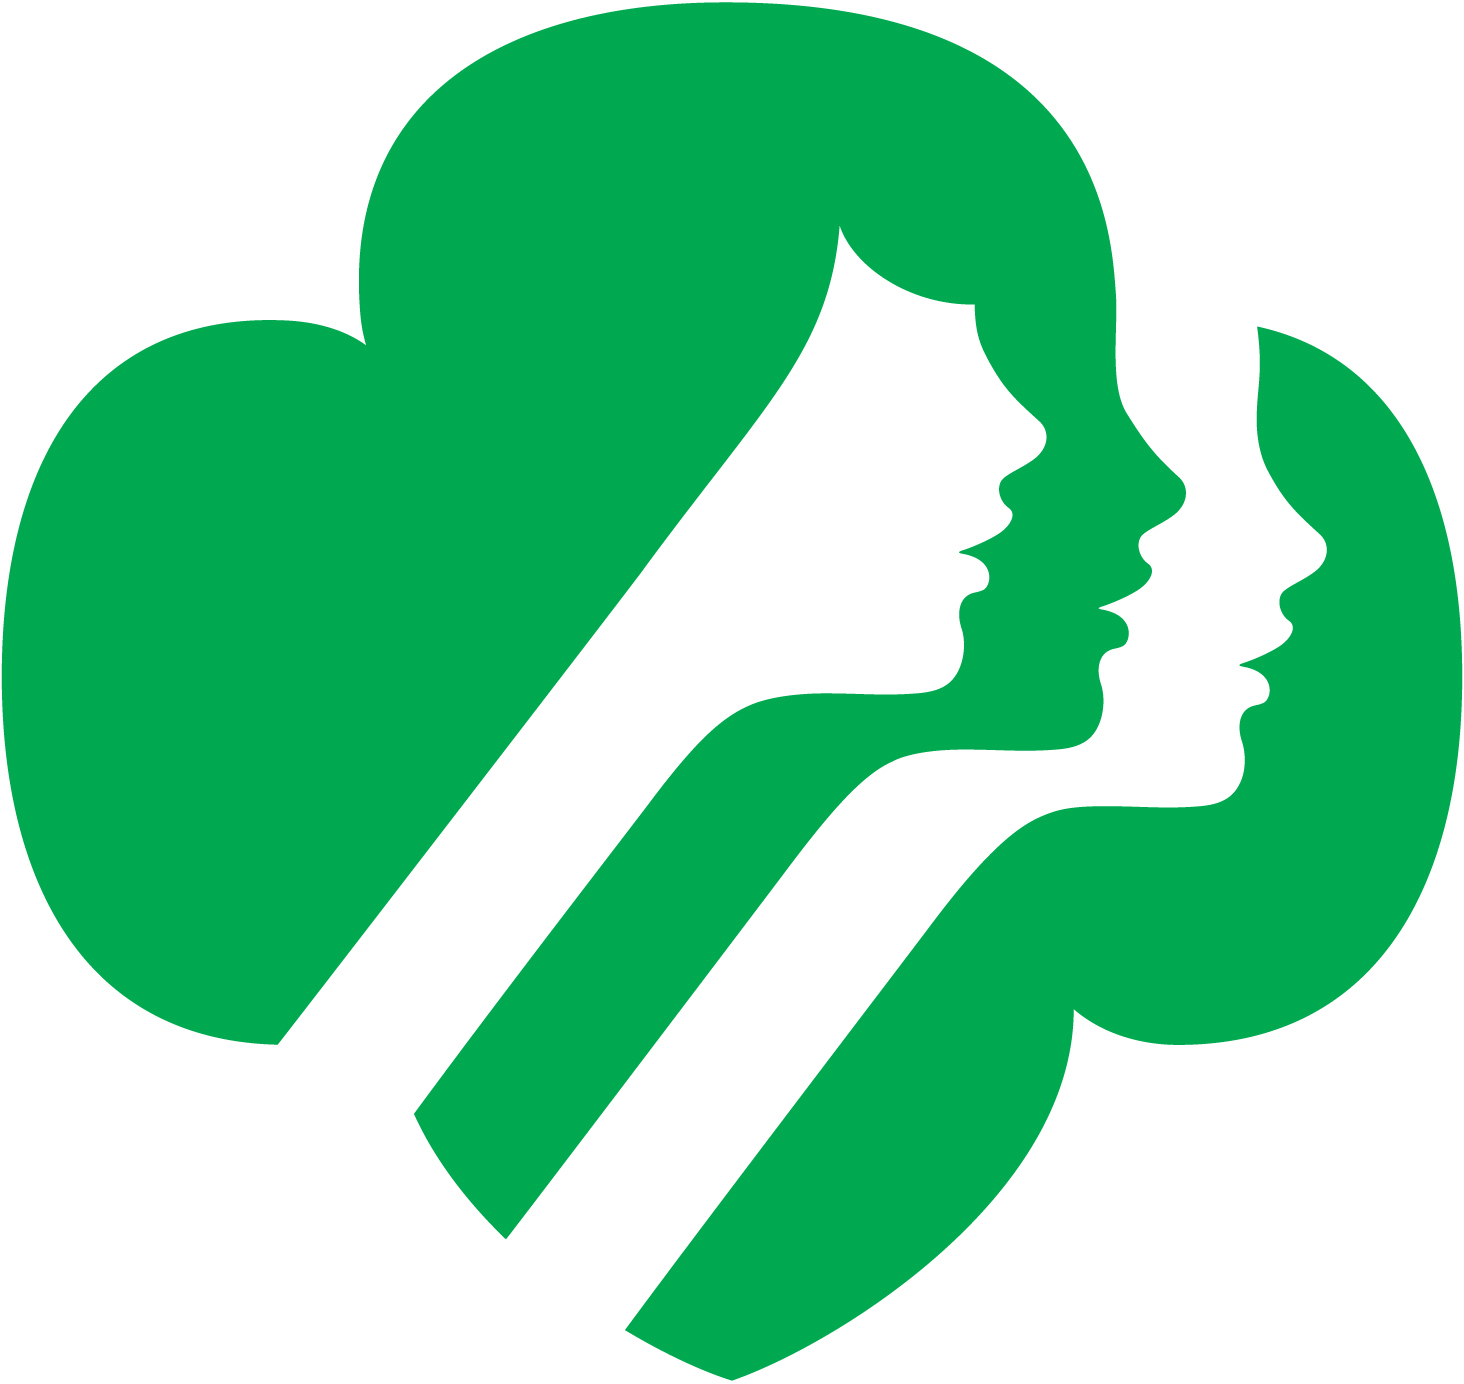 Girl Scouts of Southwest Indiana, Inc. | Volunteer Essentials ...